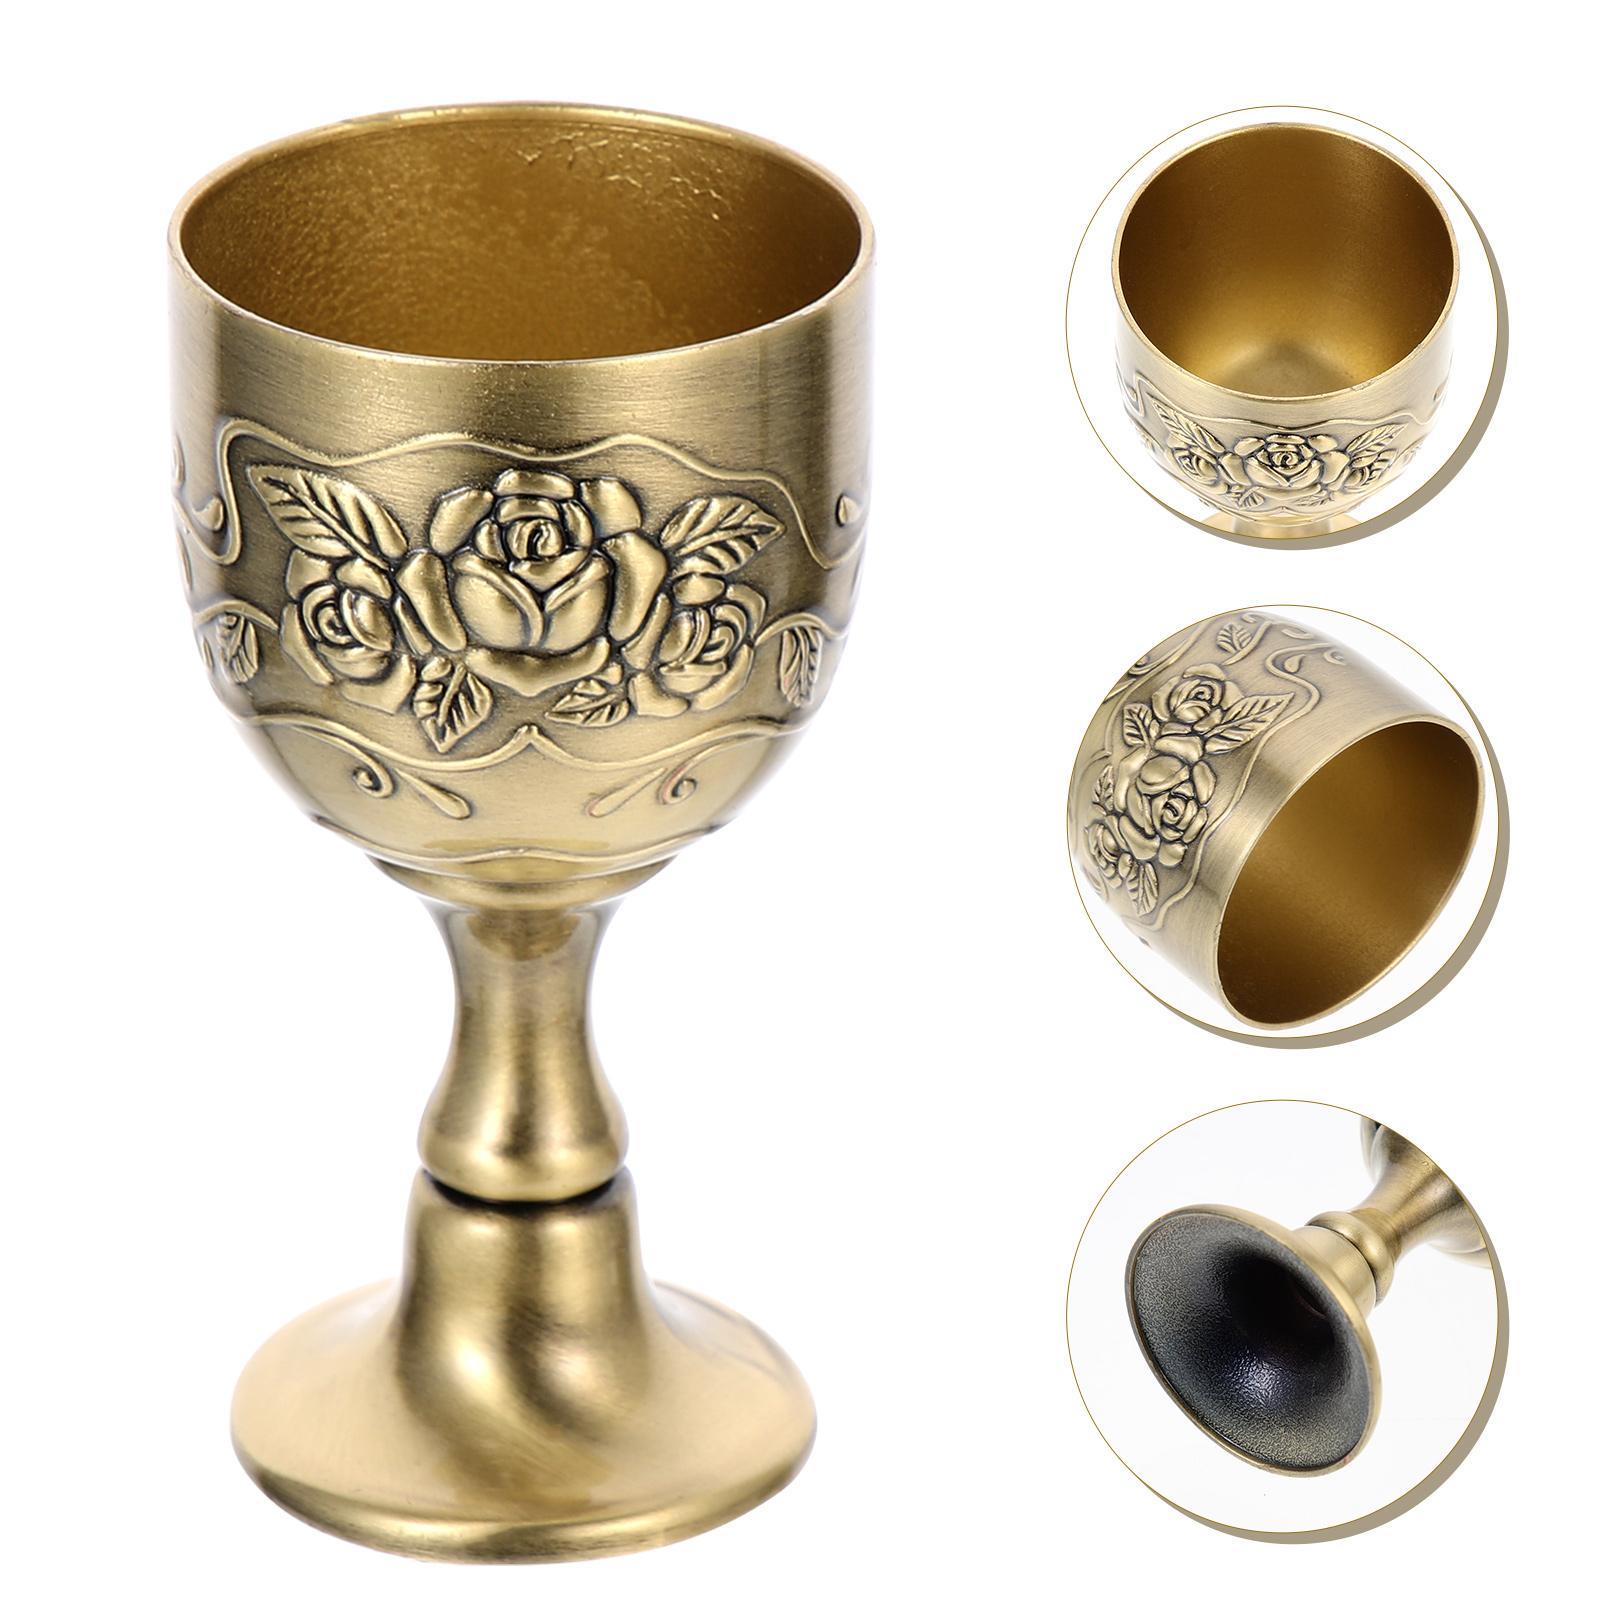 Household Wine Cup Metal Martini Glasses Wizard Goblet Spirits Delicate Tall Feet Tumblers Drinking